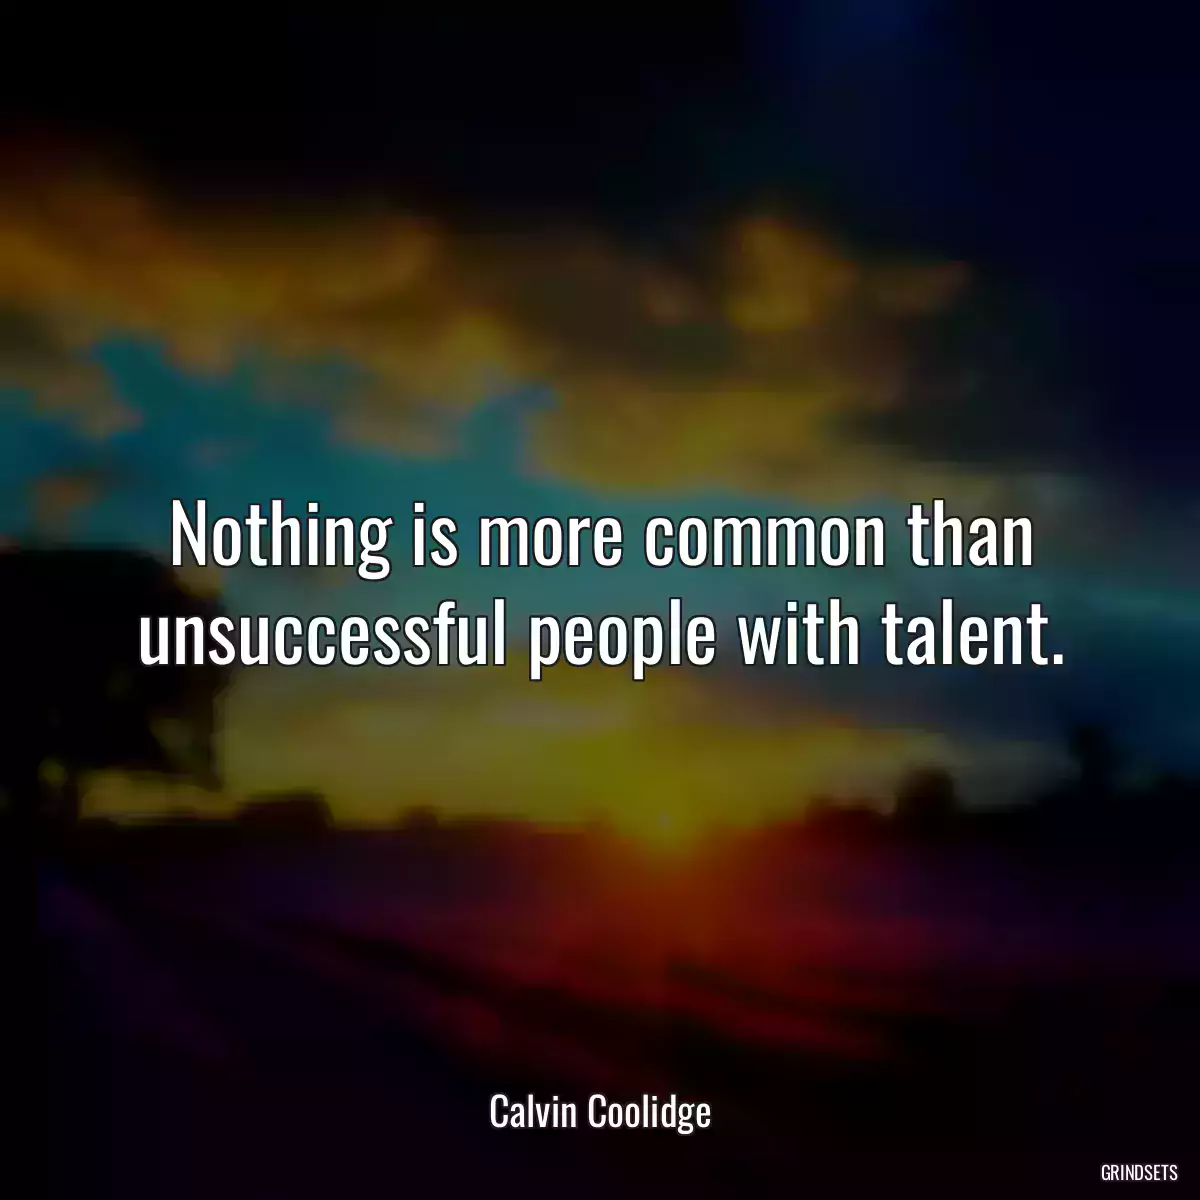 Nothing is more common than unsuccessful people with talent.